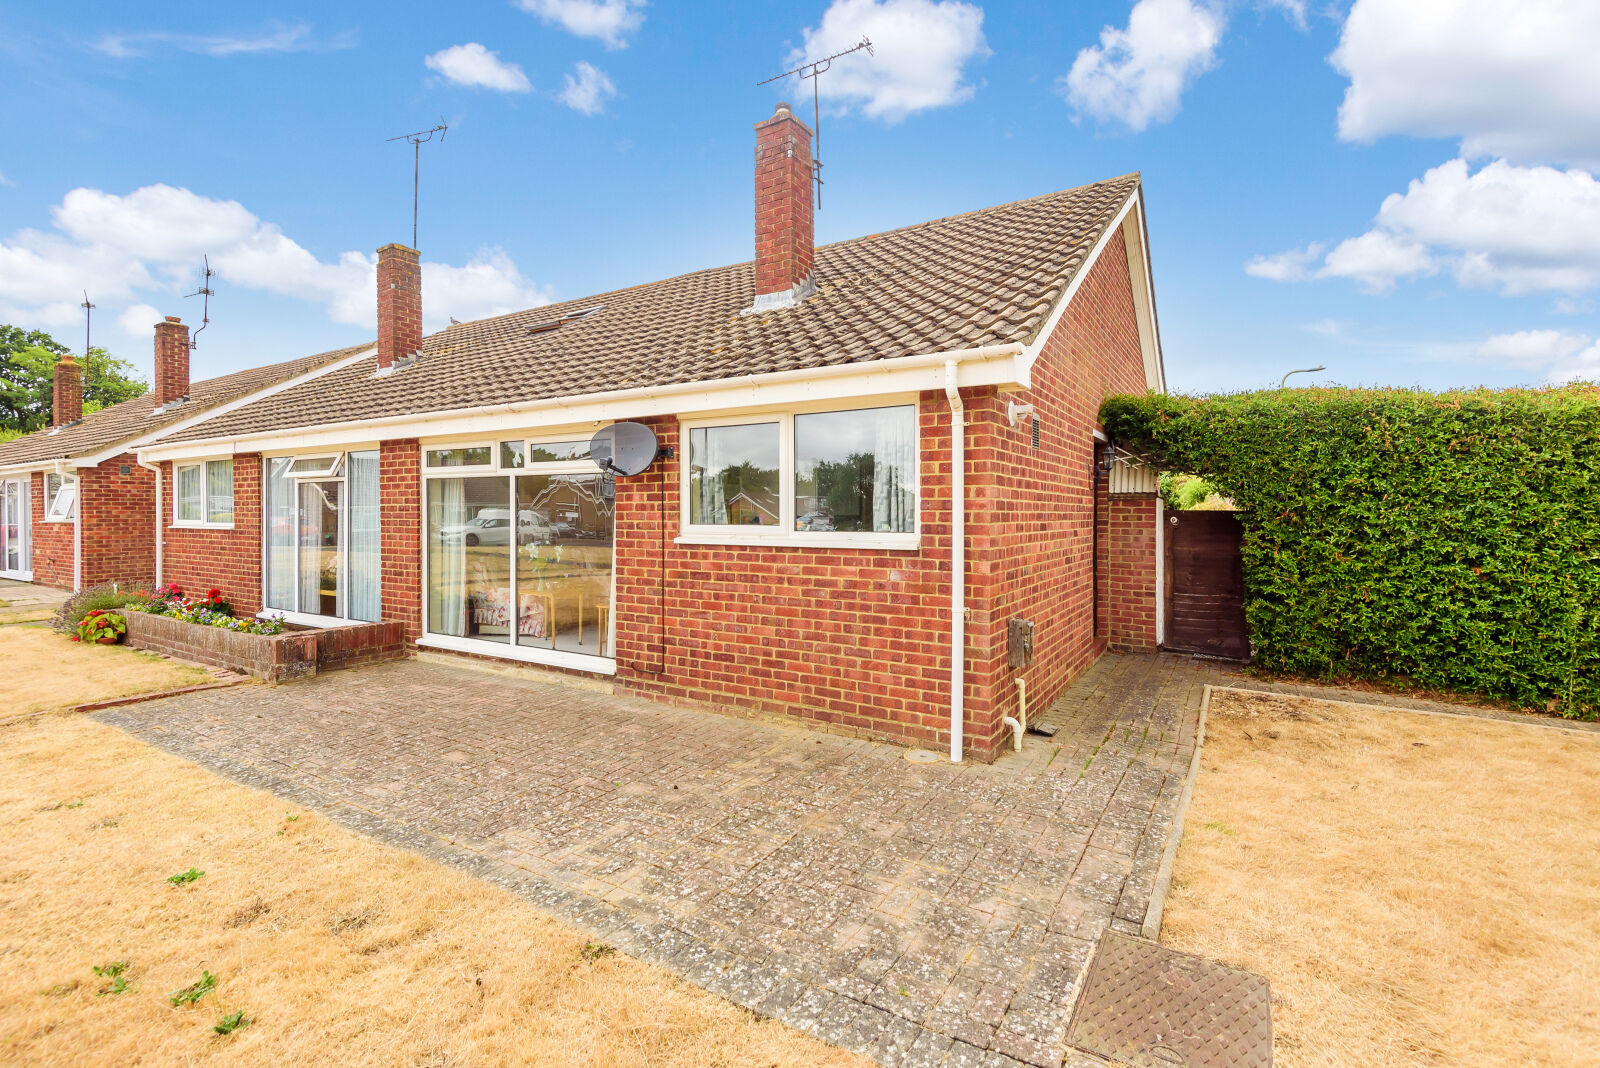 2 bedroom semi detached bungalow for sale Milsom Close, Shinfield, RG2, main image